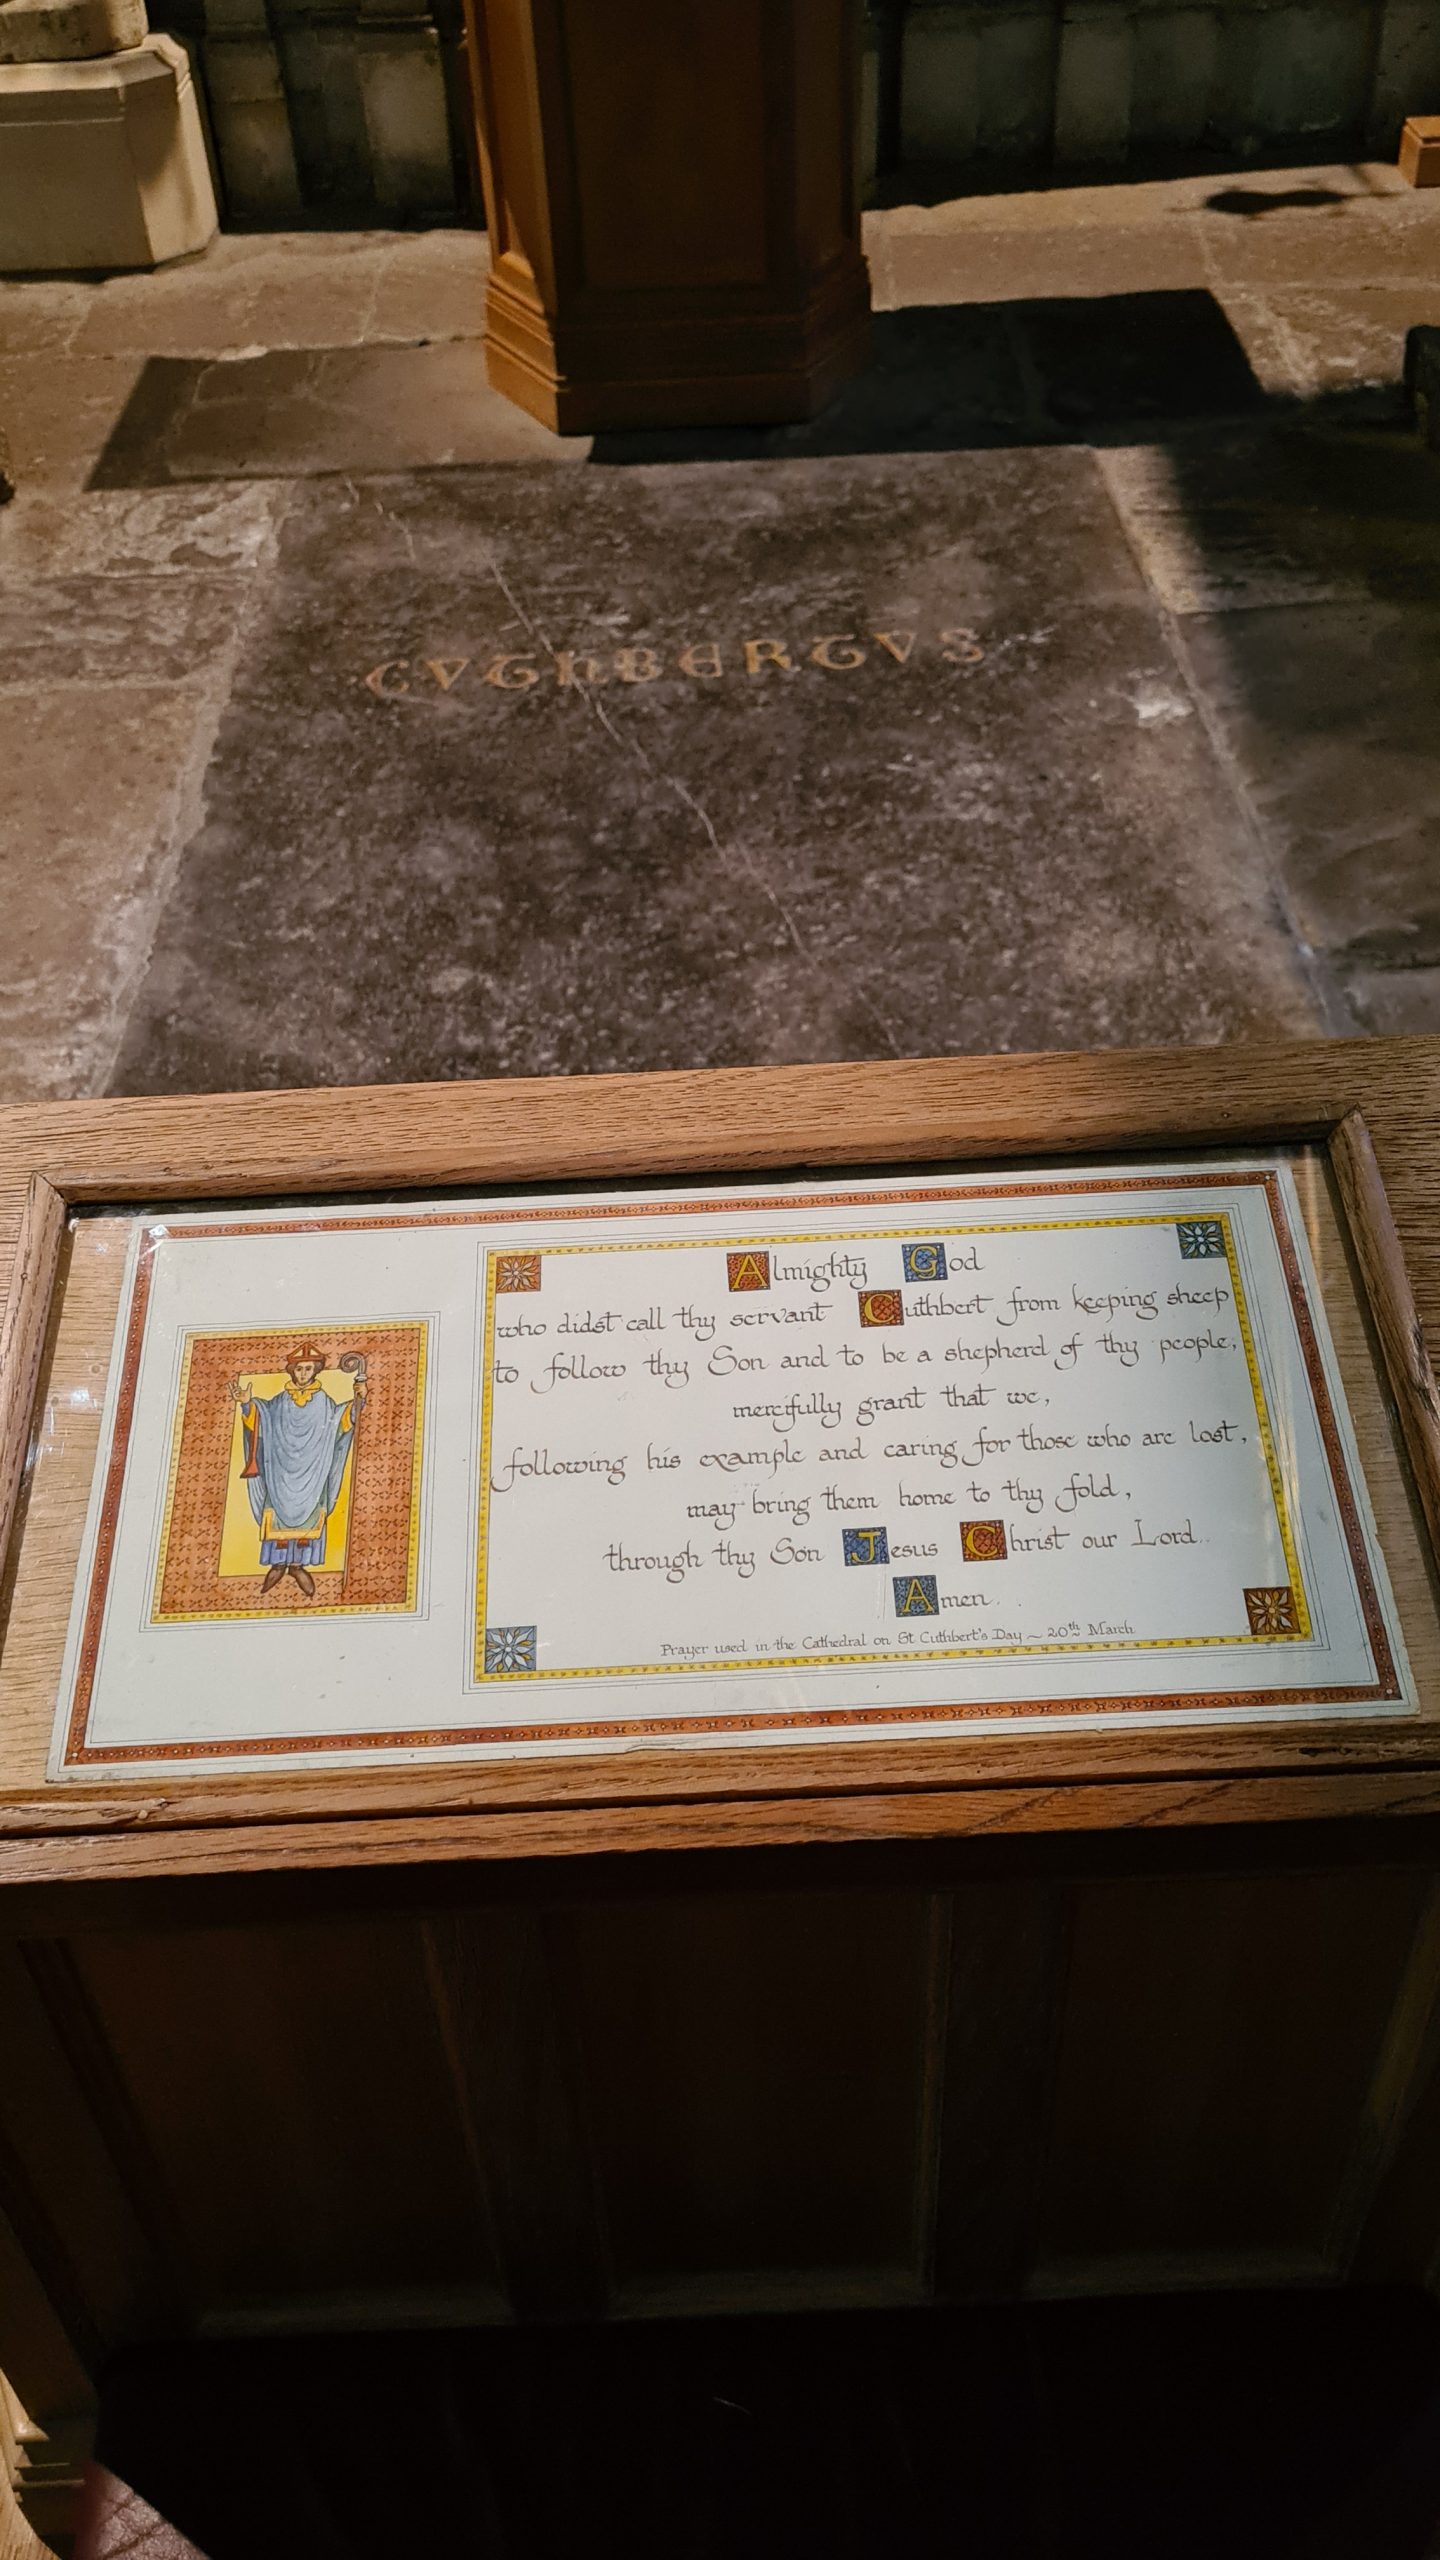 St. Cuthbert's shrine in Durham cathedral